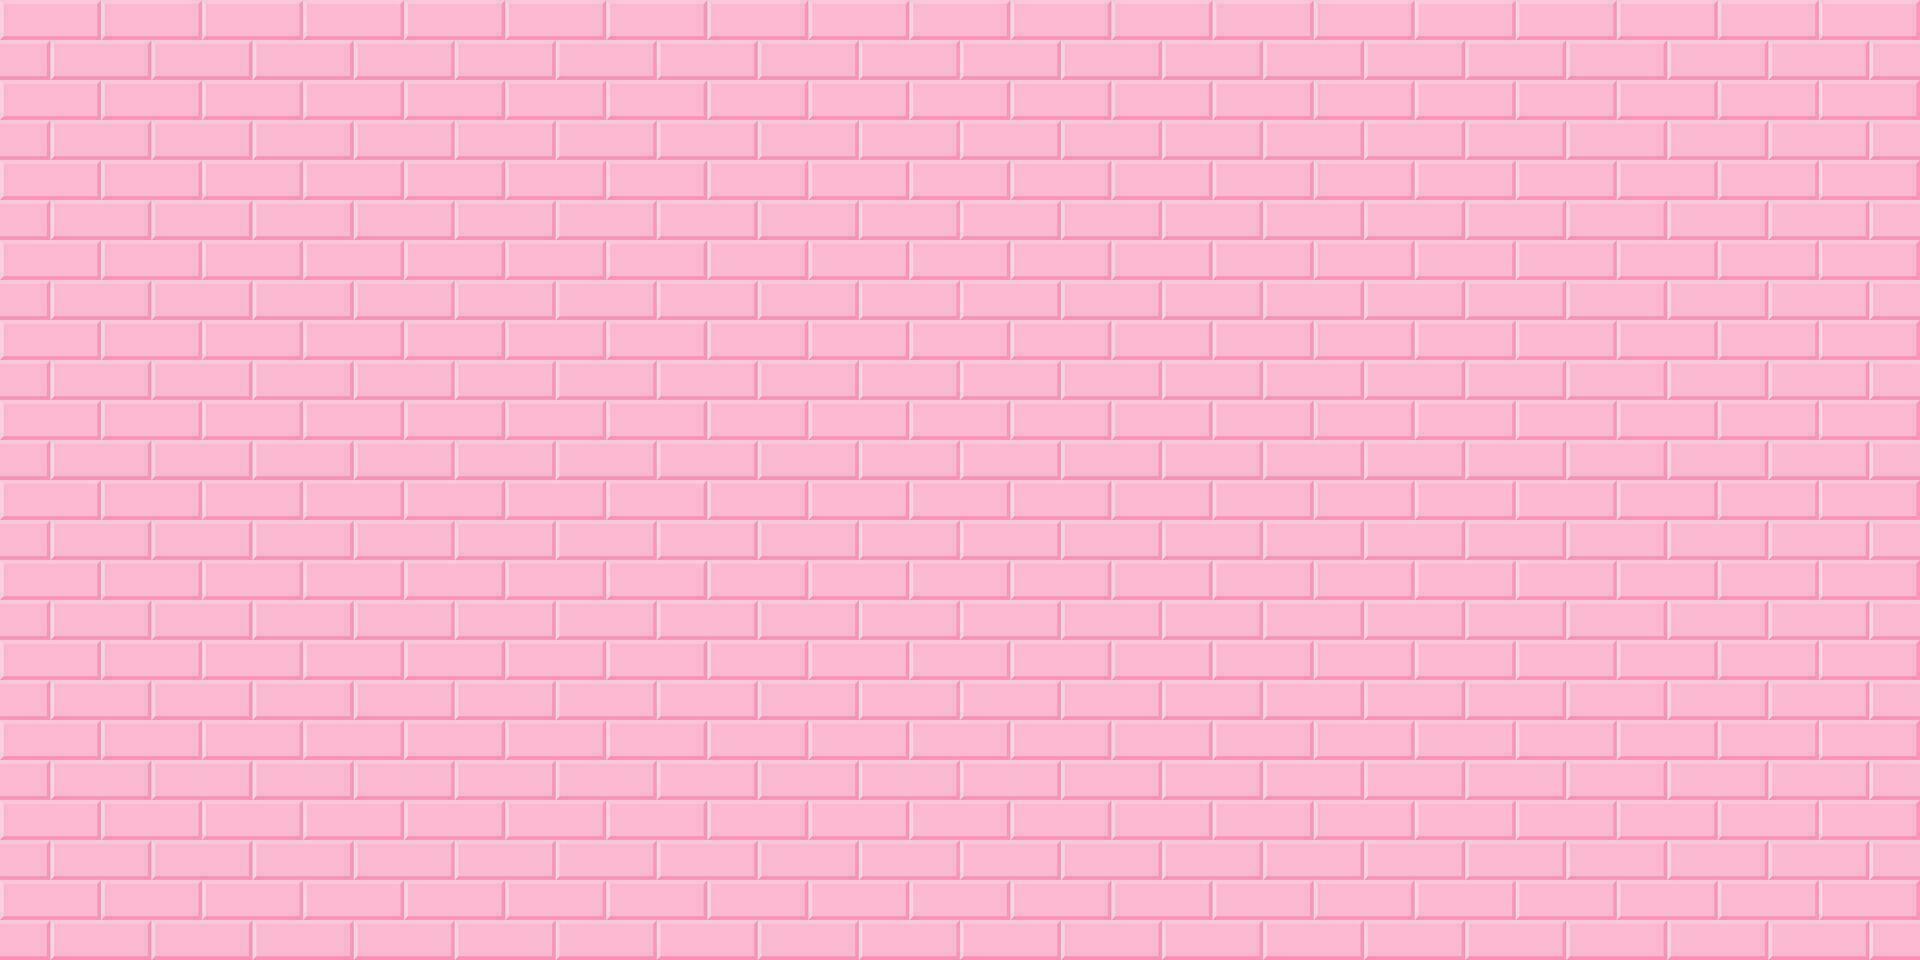 Pink brick wall background, Abstract geometric seamless pattern design, Vector illustration